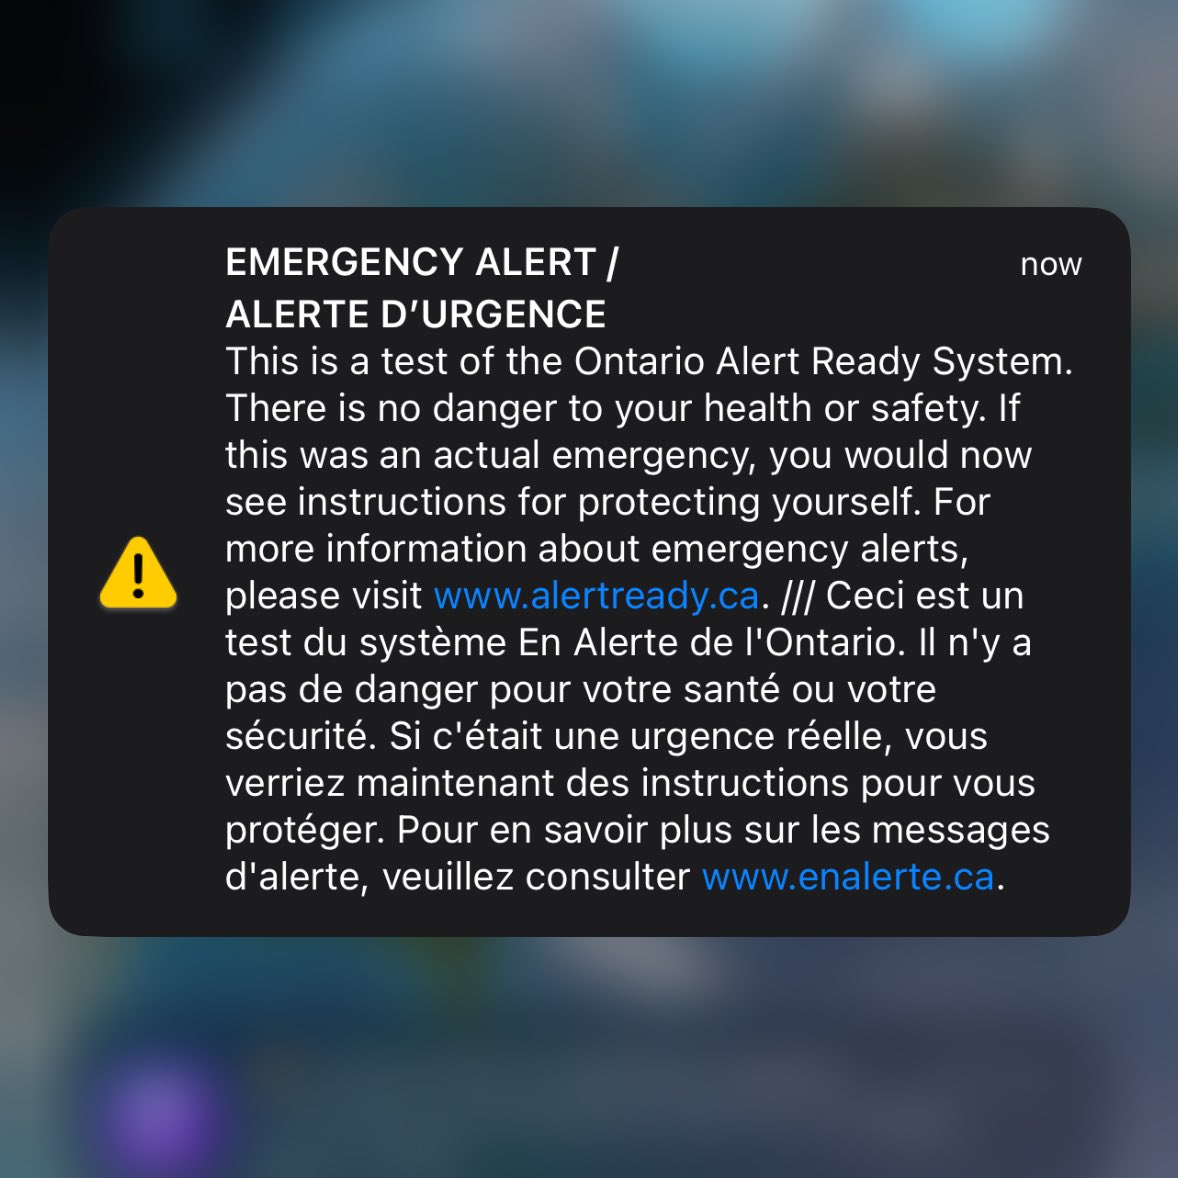 Holy Shit

The Emergency Alert respected my Silent Vibration mode, instead of giving me a Mini Heart Attack.

EXCEPT it cut into the Blue Jays-Orioles game on the radio. #EmergencyAlert